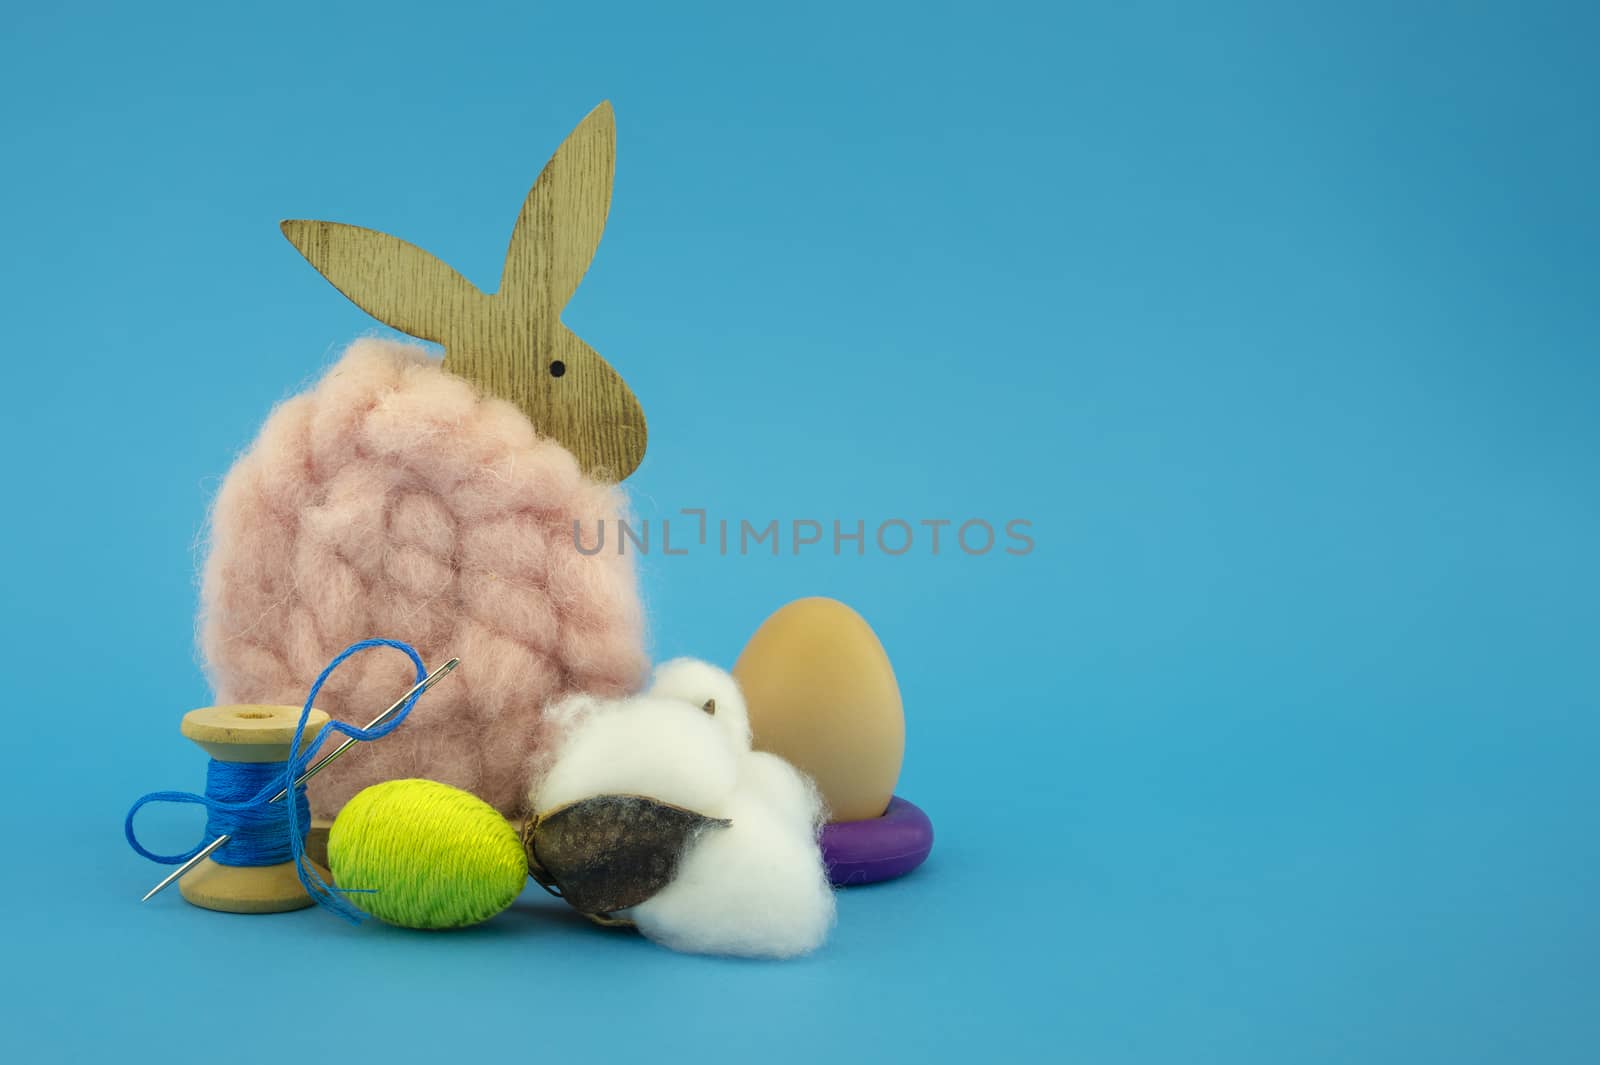 Colorful creative Easter still life with handicrafts featuring egg on purple ring, a natural fluffy cotton or wool rabbit over blue